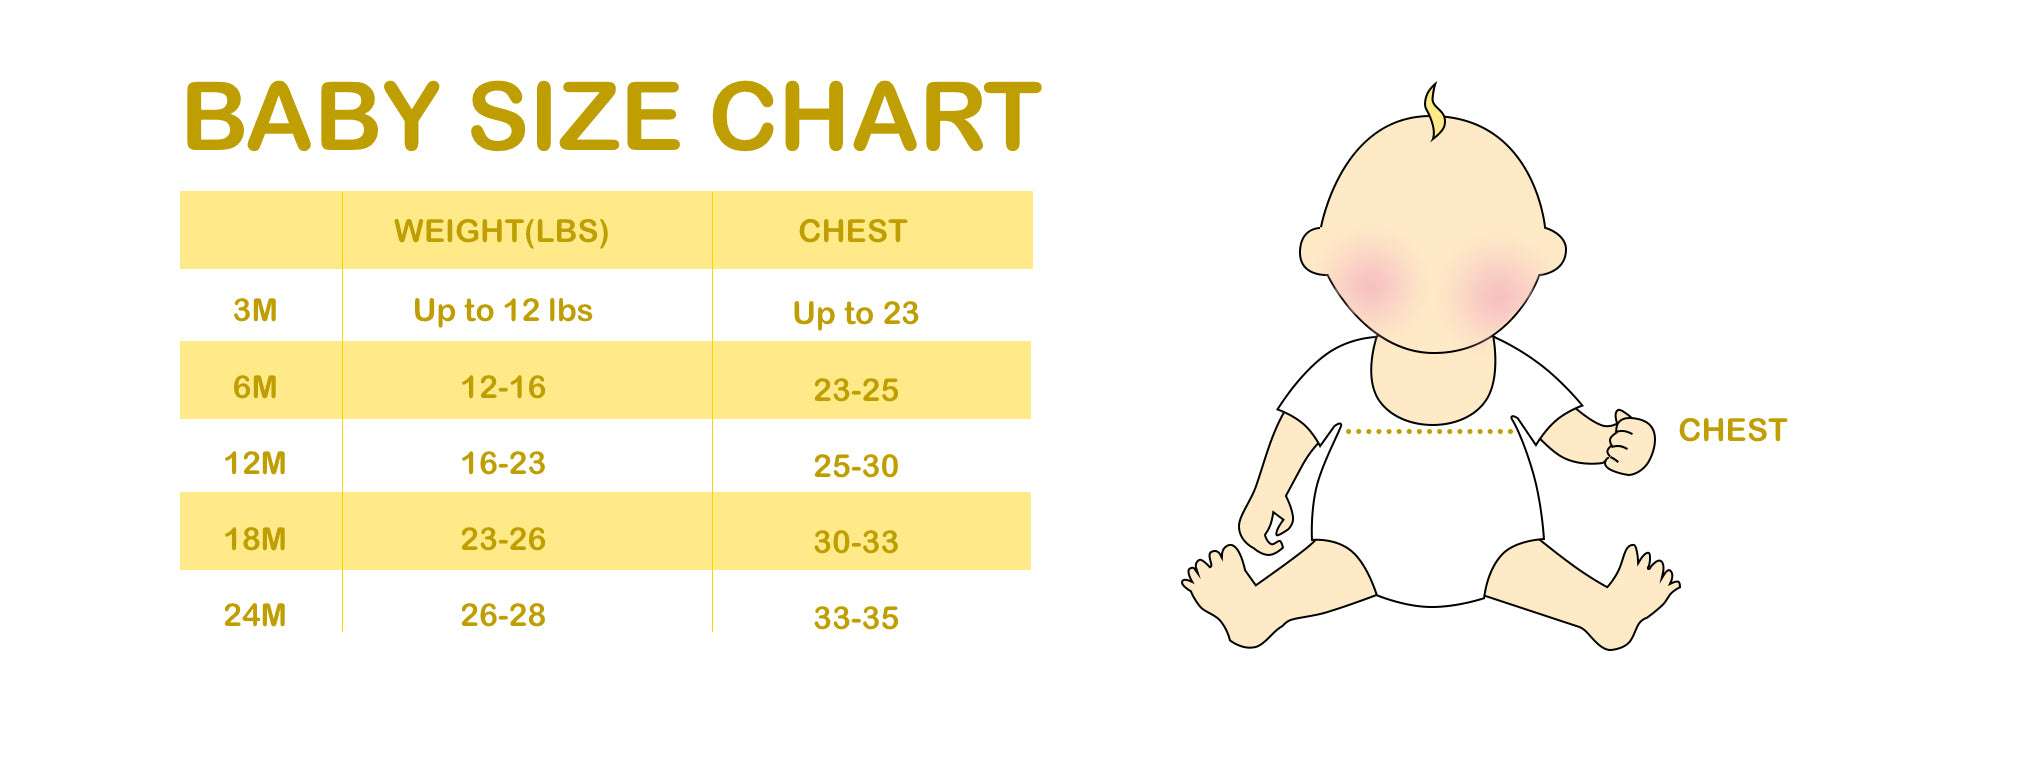 Baby size chart